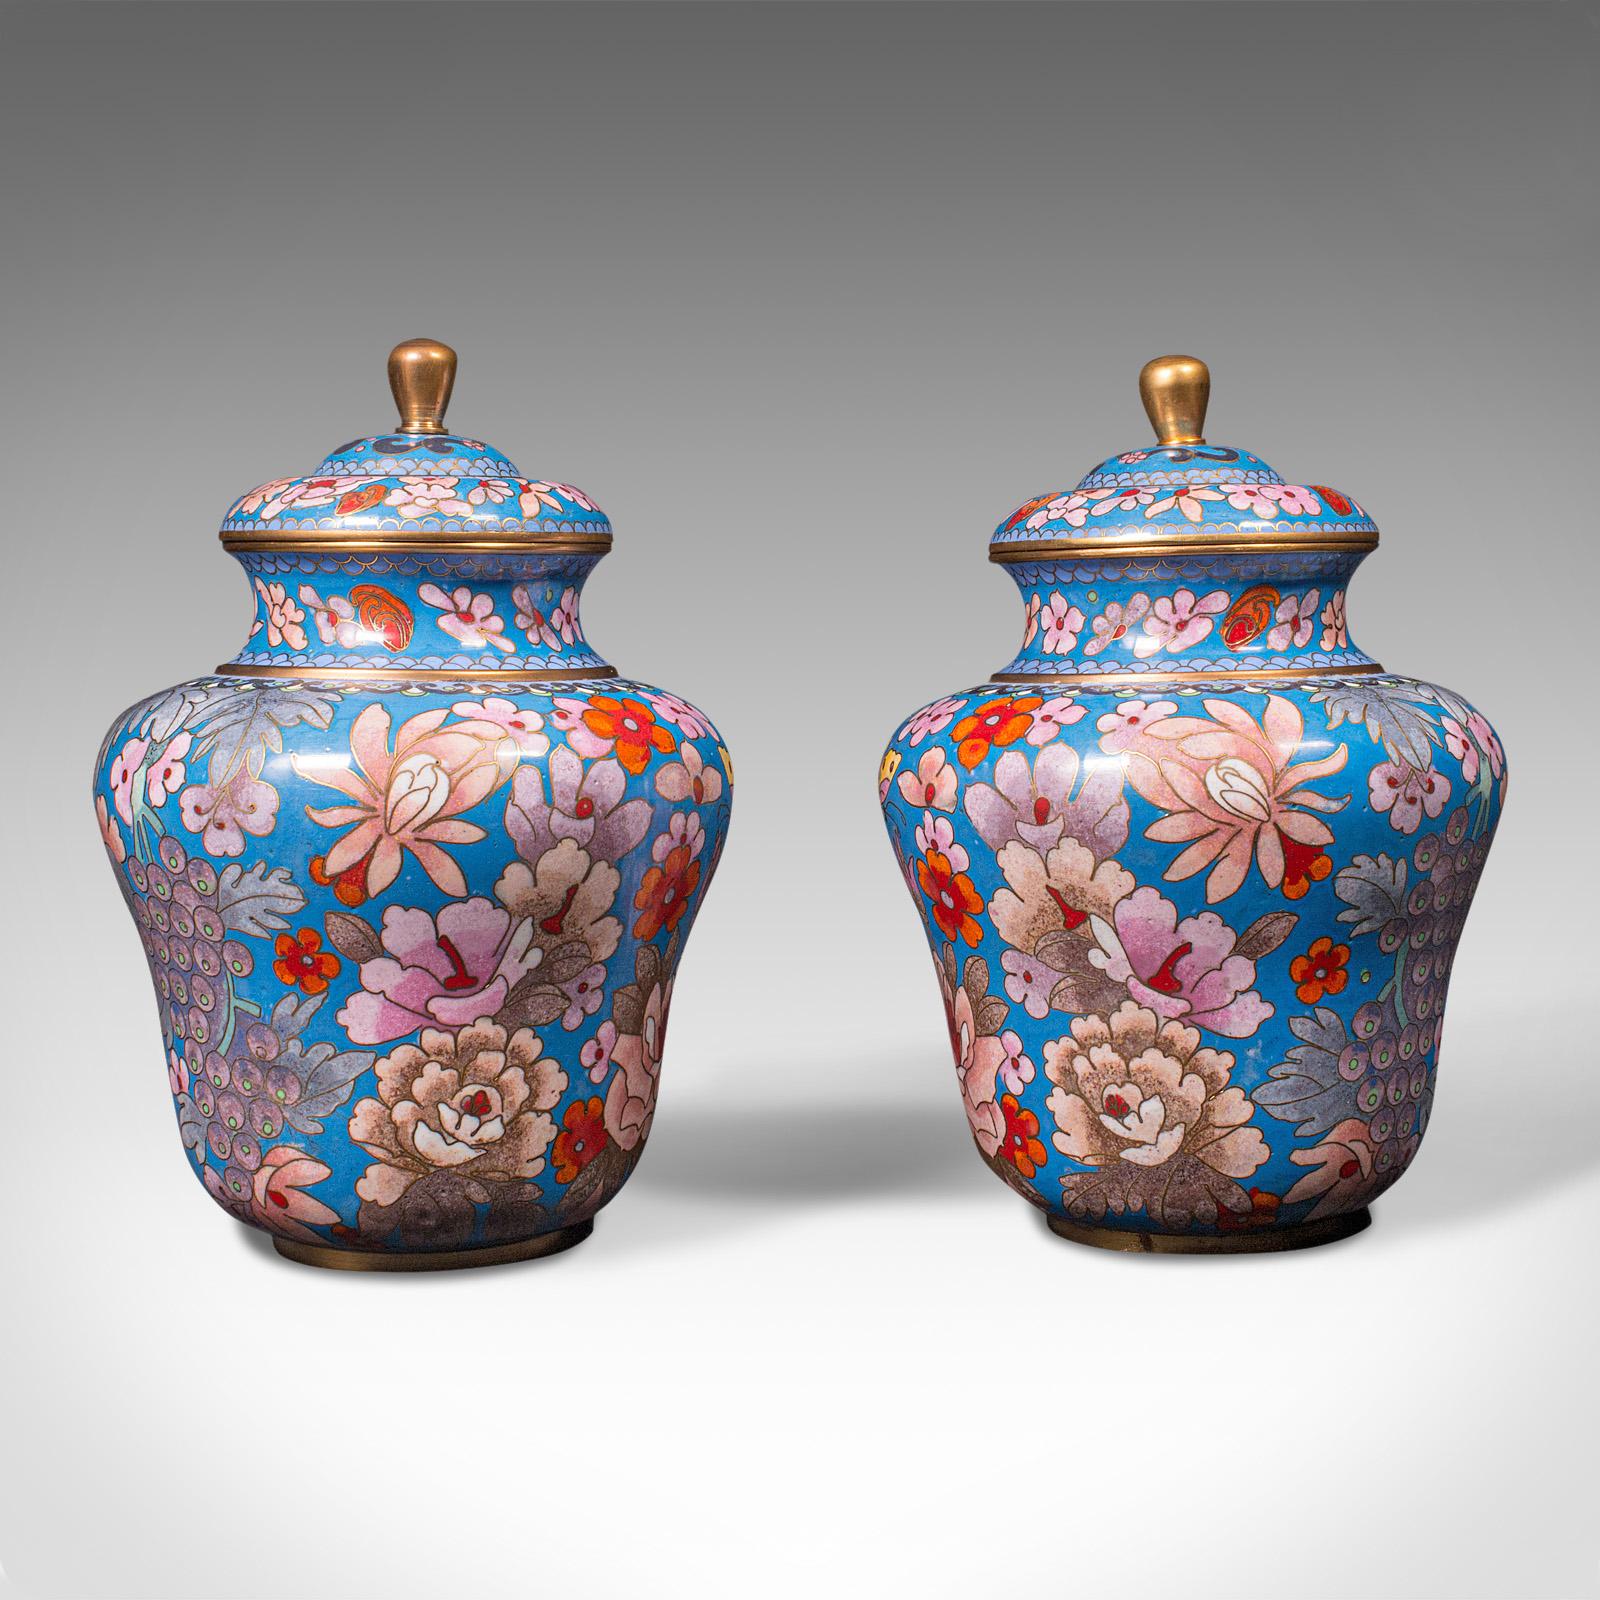 Pair of Antique Cloisonne Spice Jars, English Ceramic, Decorative Pot, Victorian In Good Condition For Sale In Hele, Devon, GB